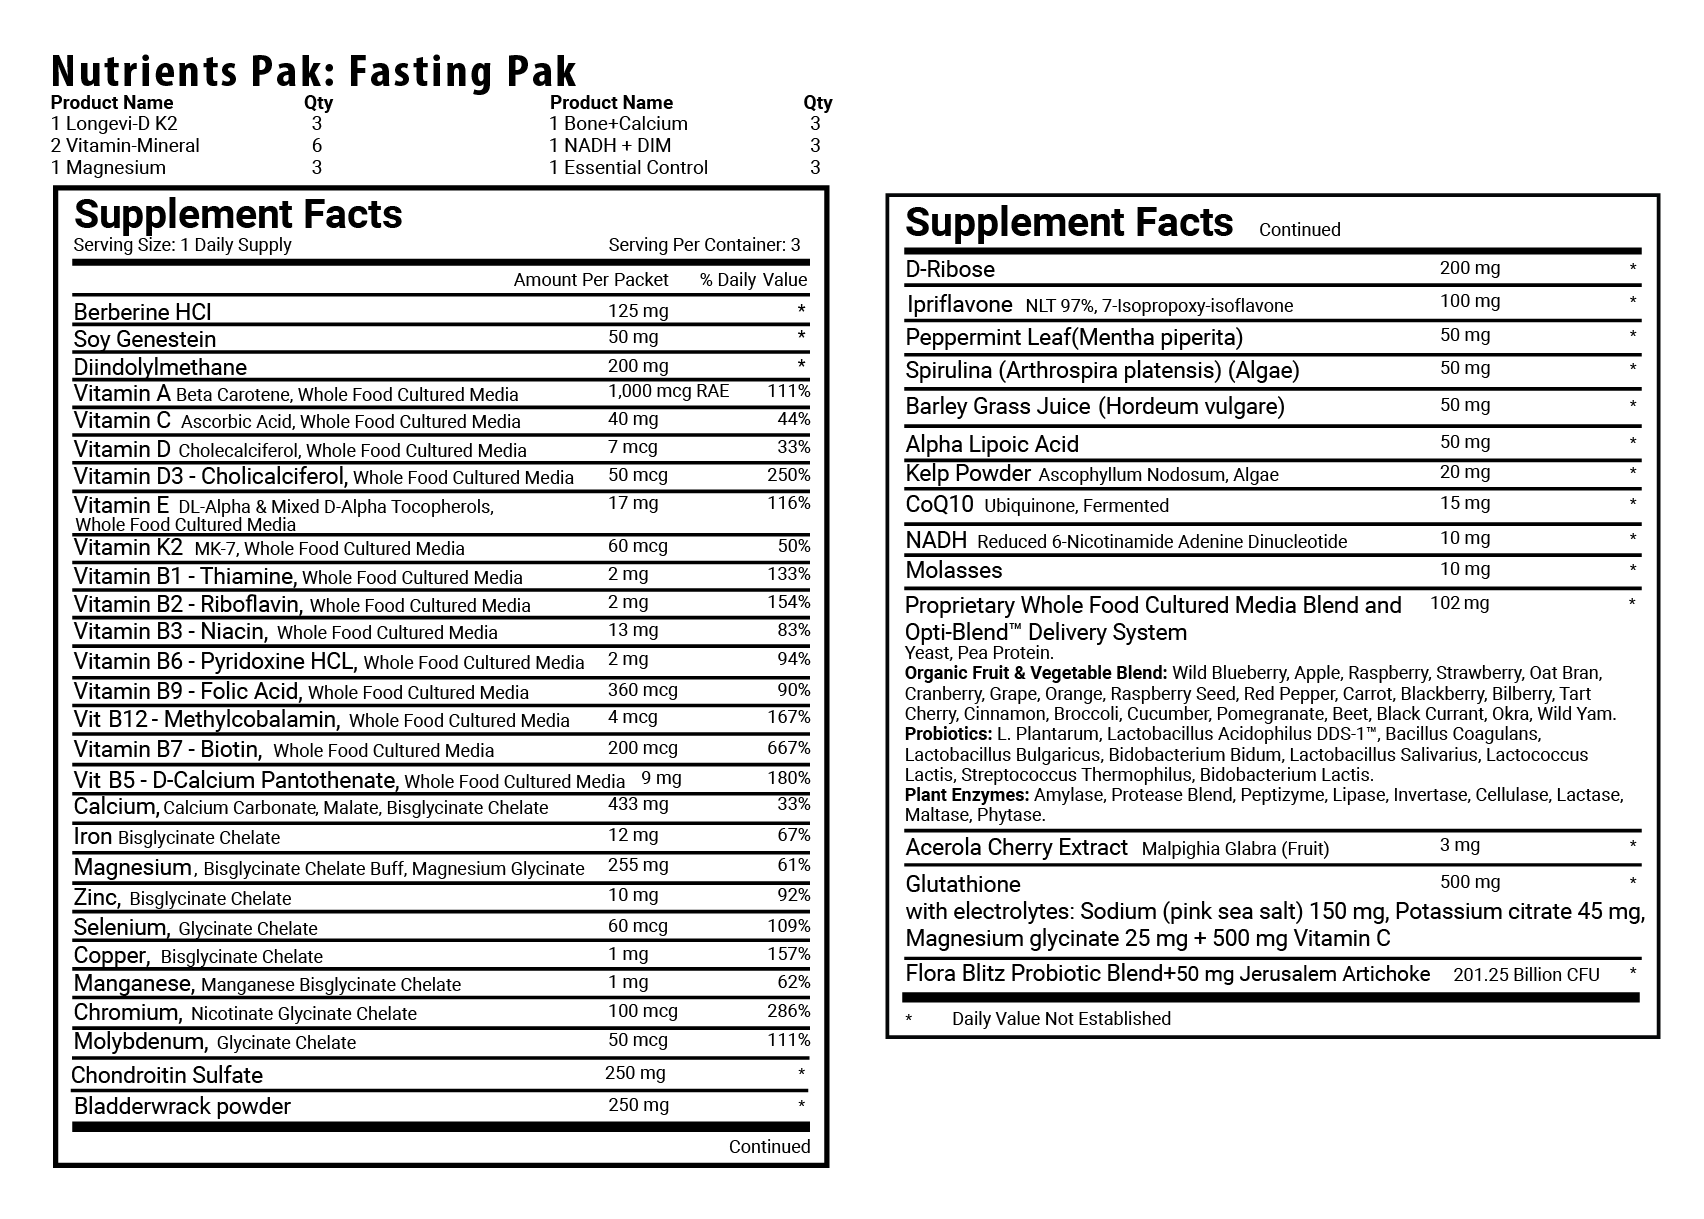 Fasting pak supplement facts.